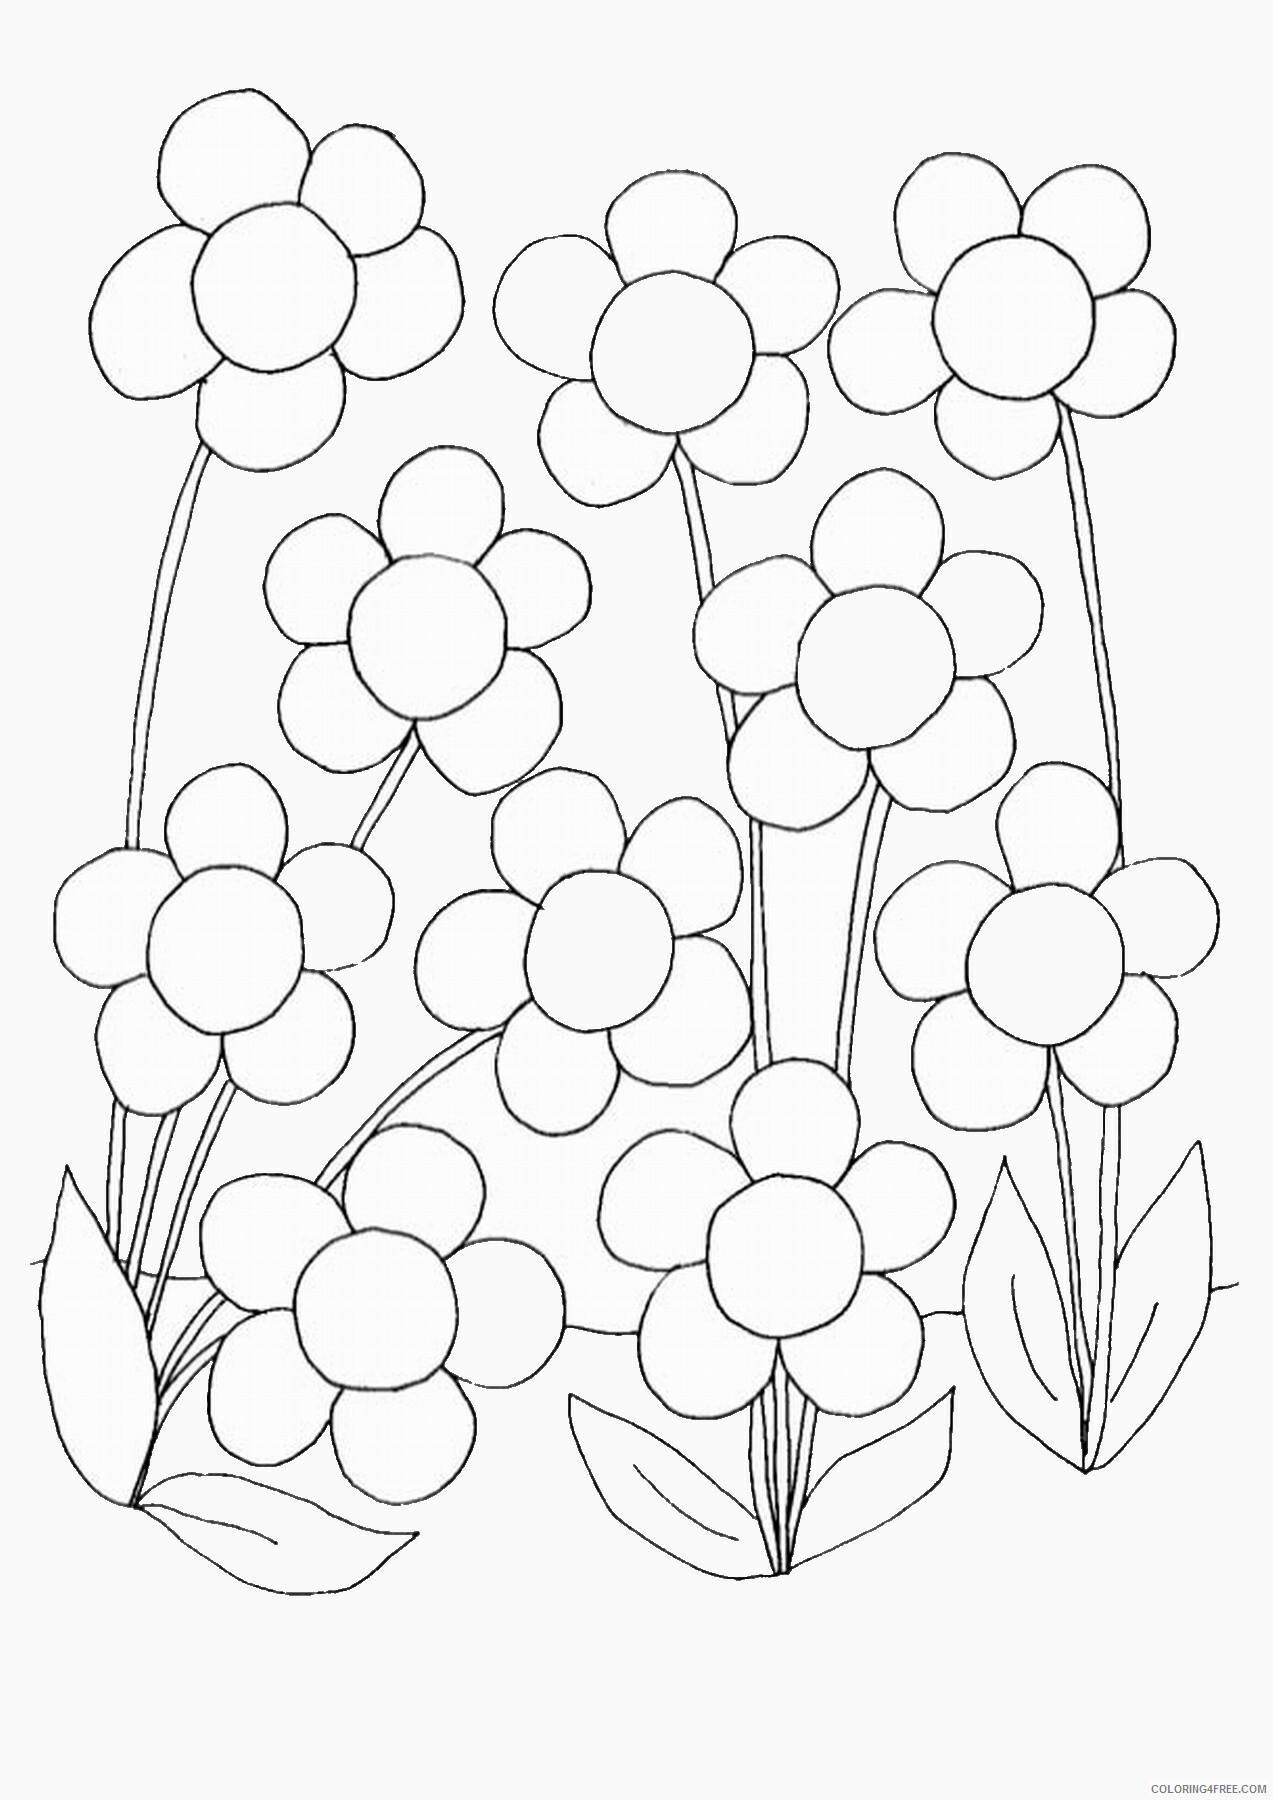 Printable Flower Coloring Pages Flowers Nature flowerc52 Printable 2021 383 Coloring4free